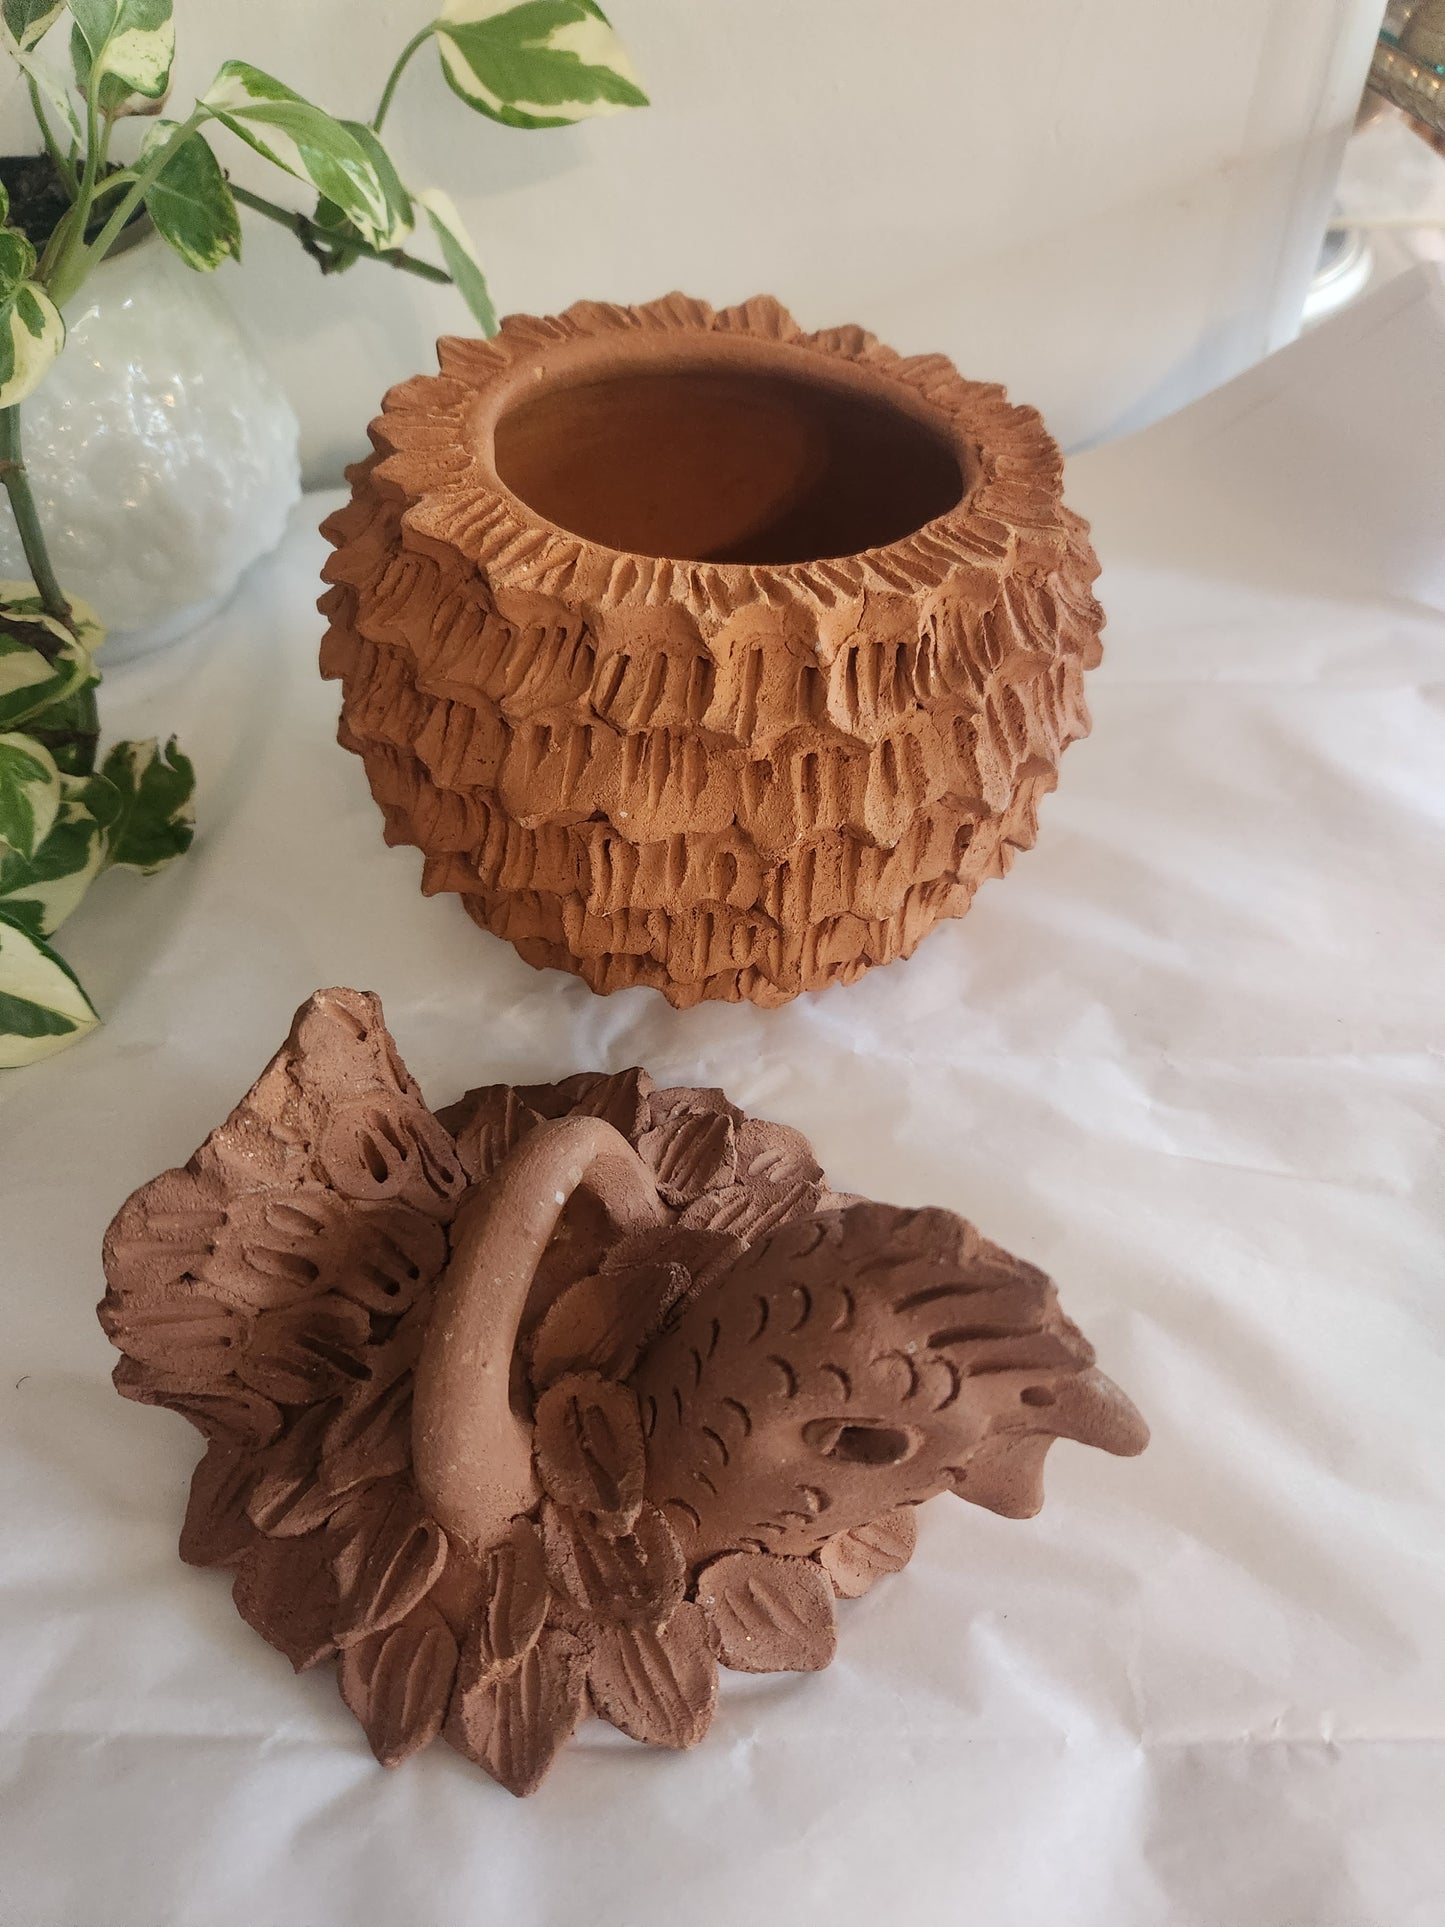 Rustic Pottery Chicken Bowl